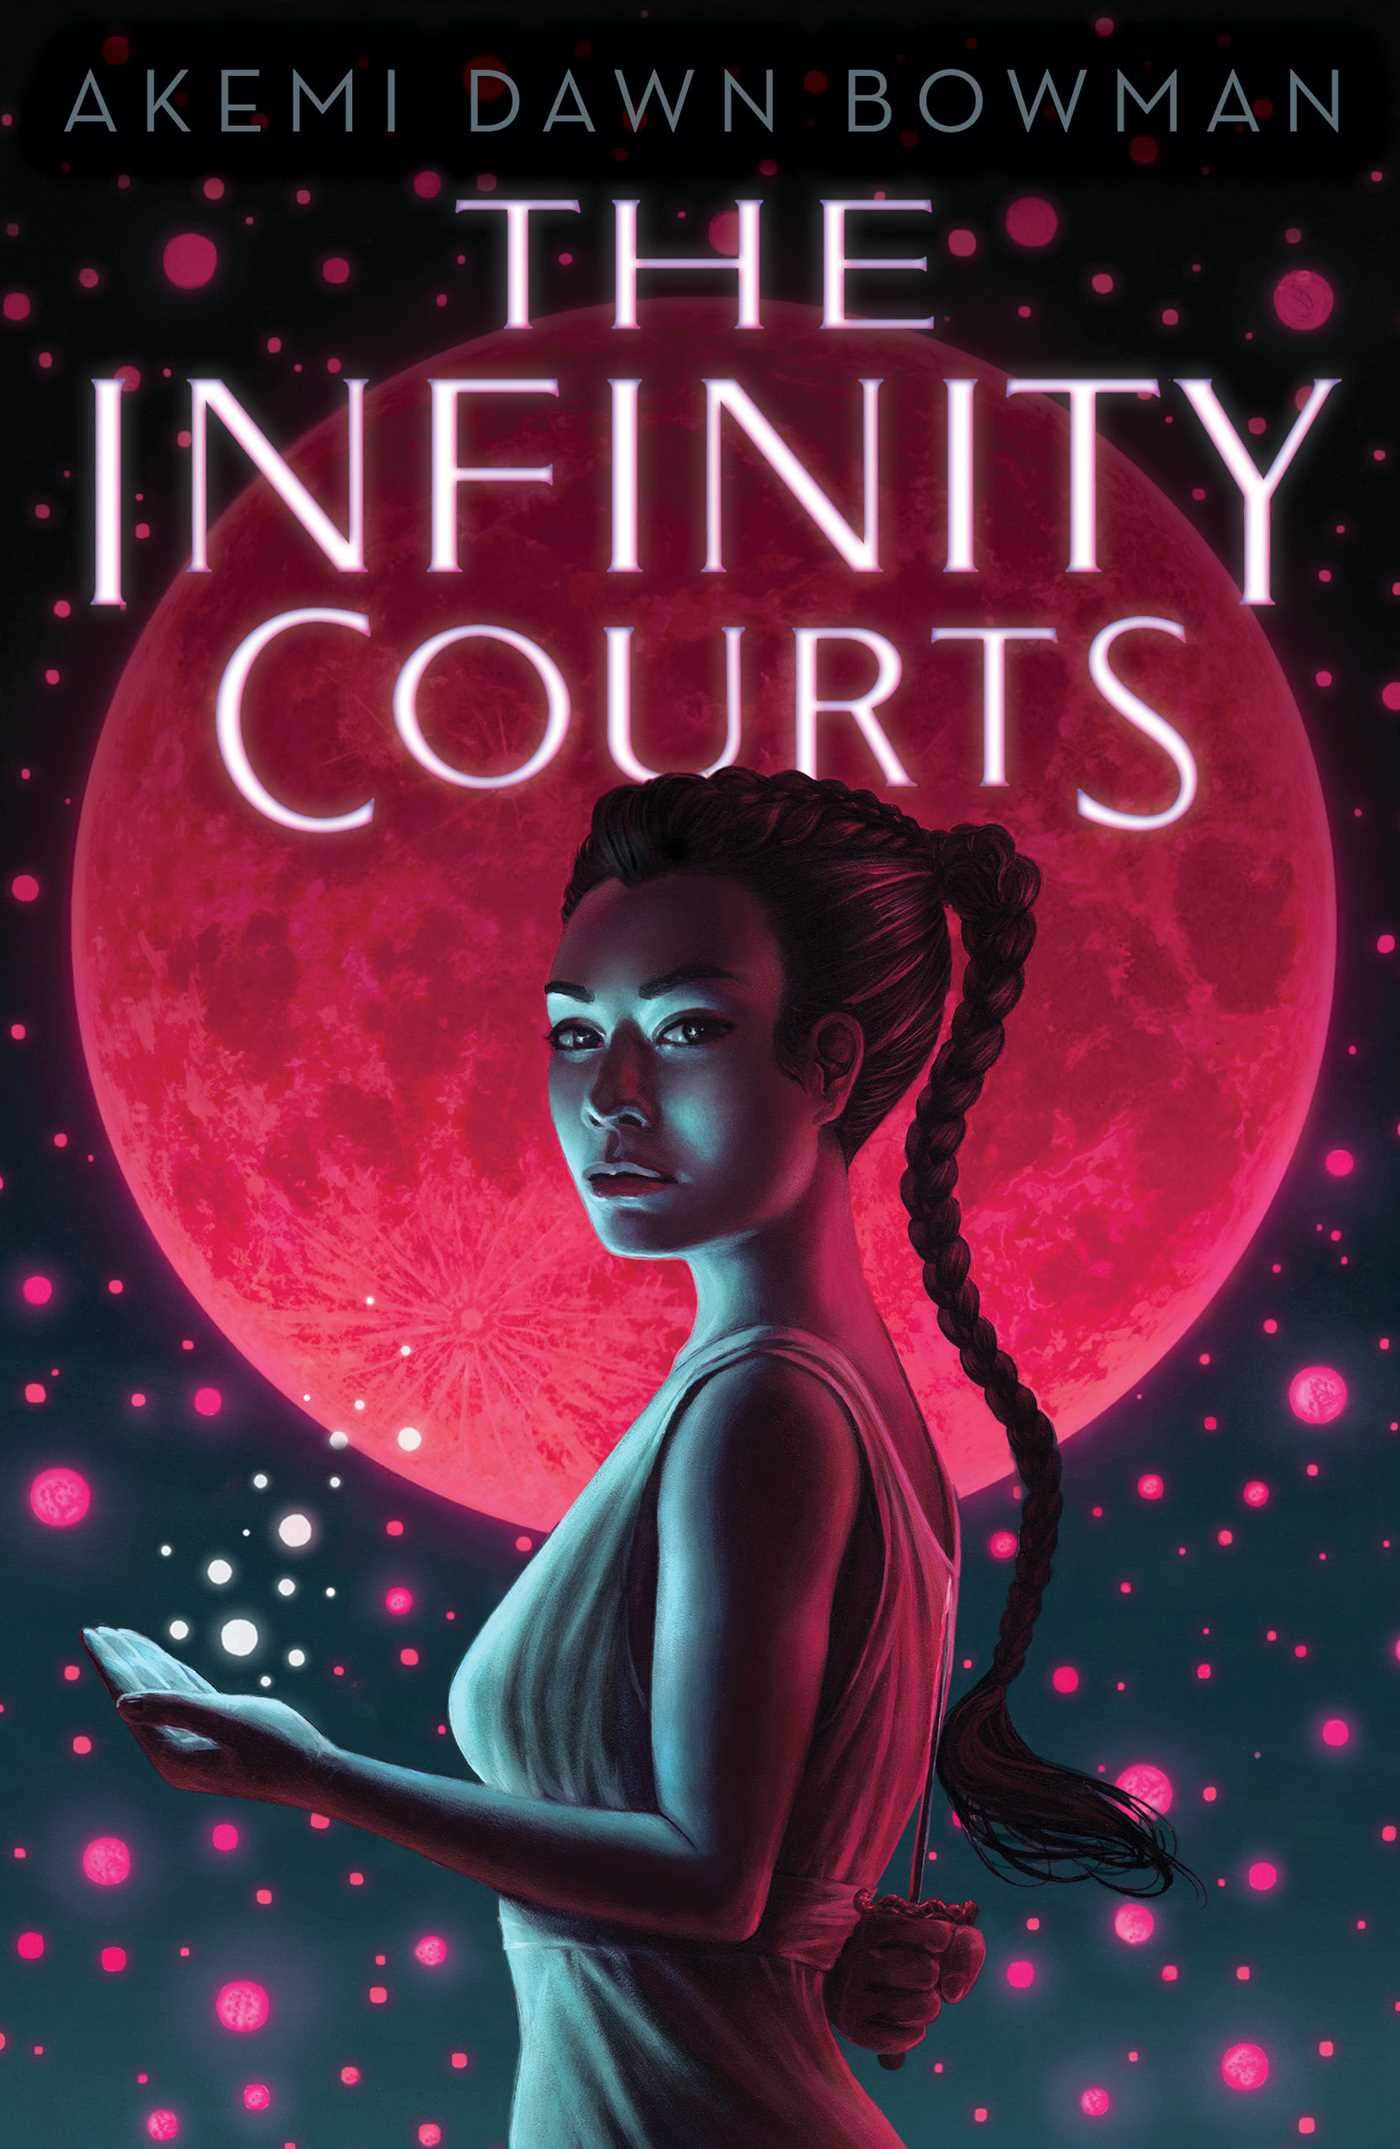 Image for "The Infinity Courts"